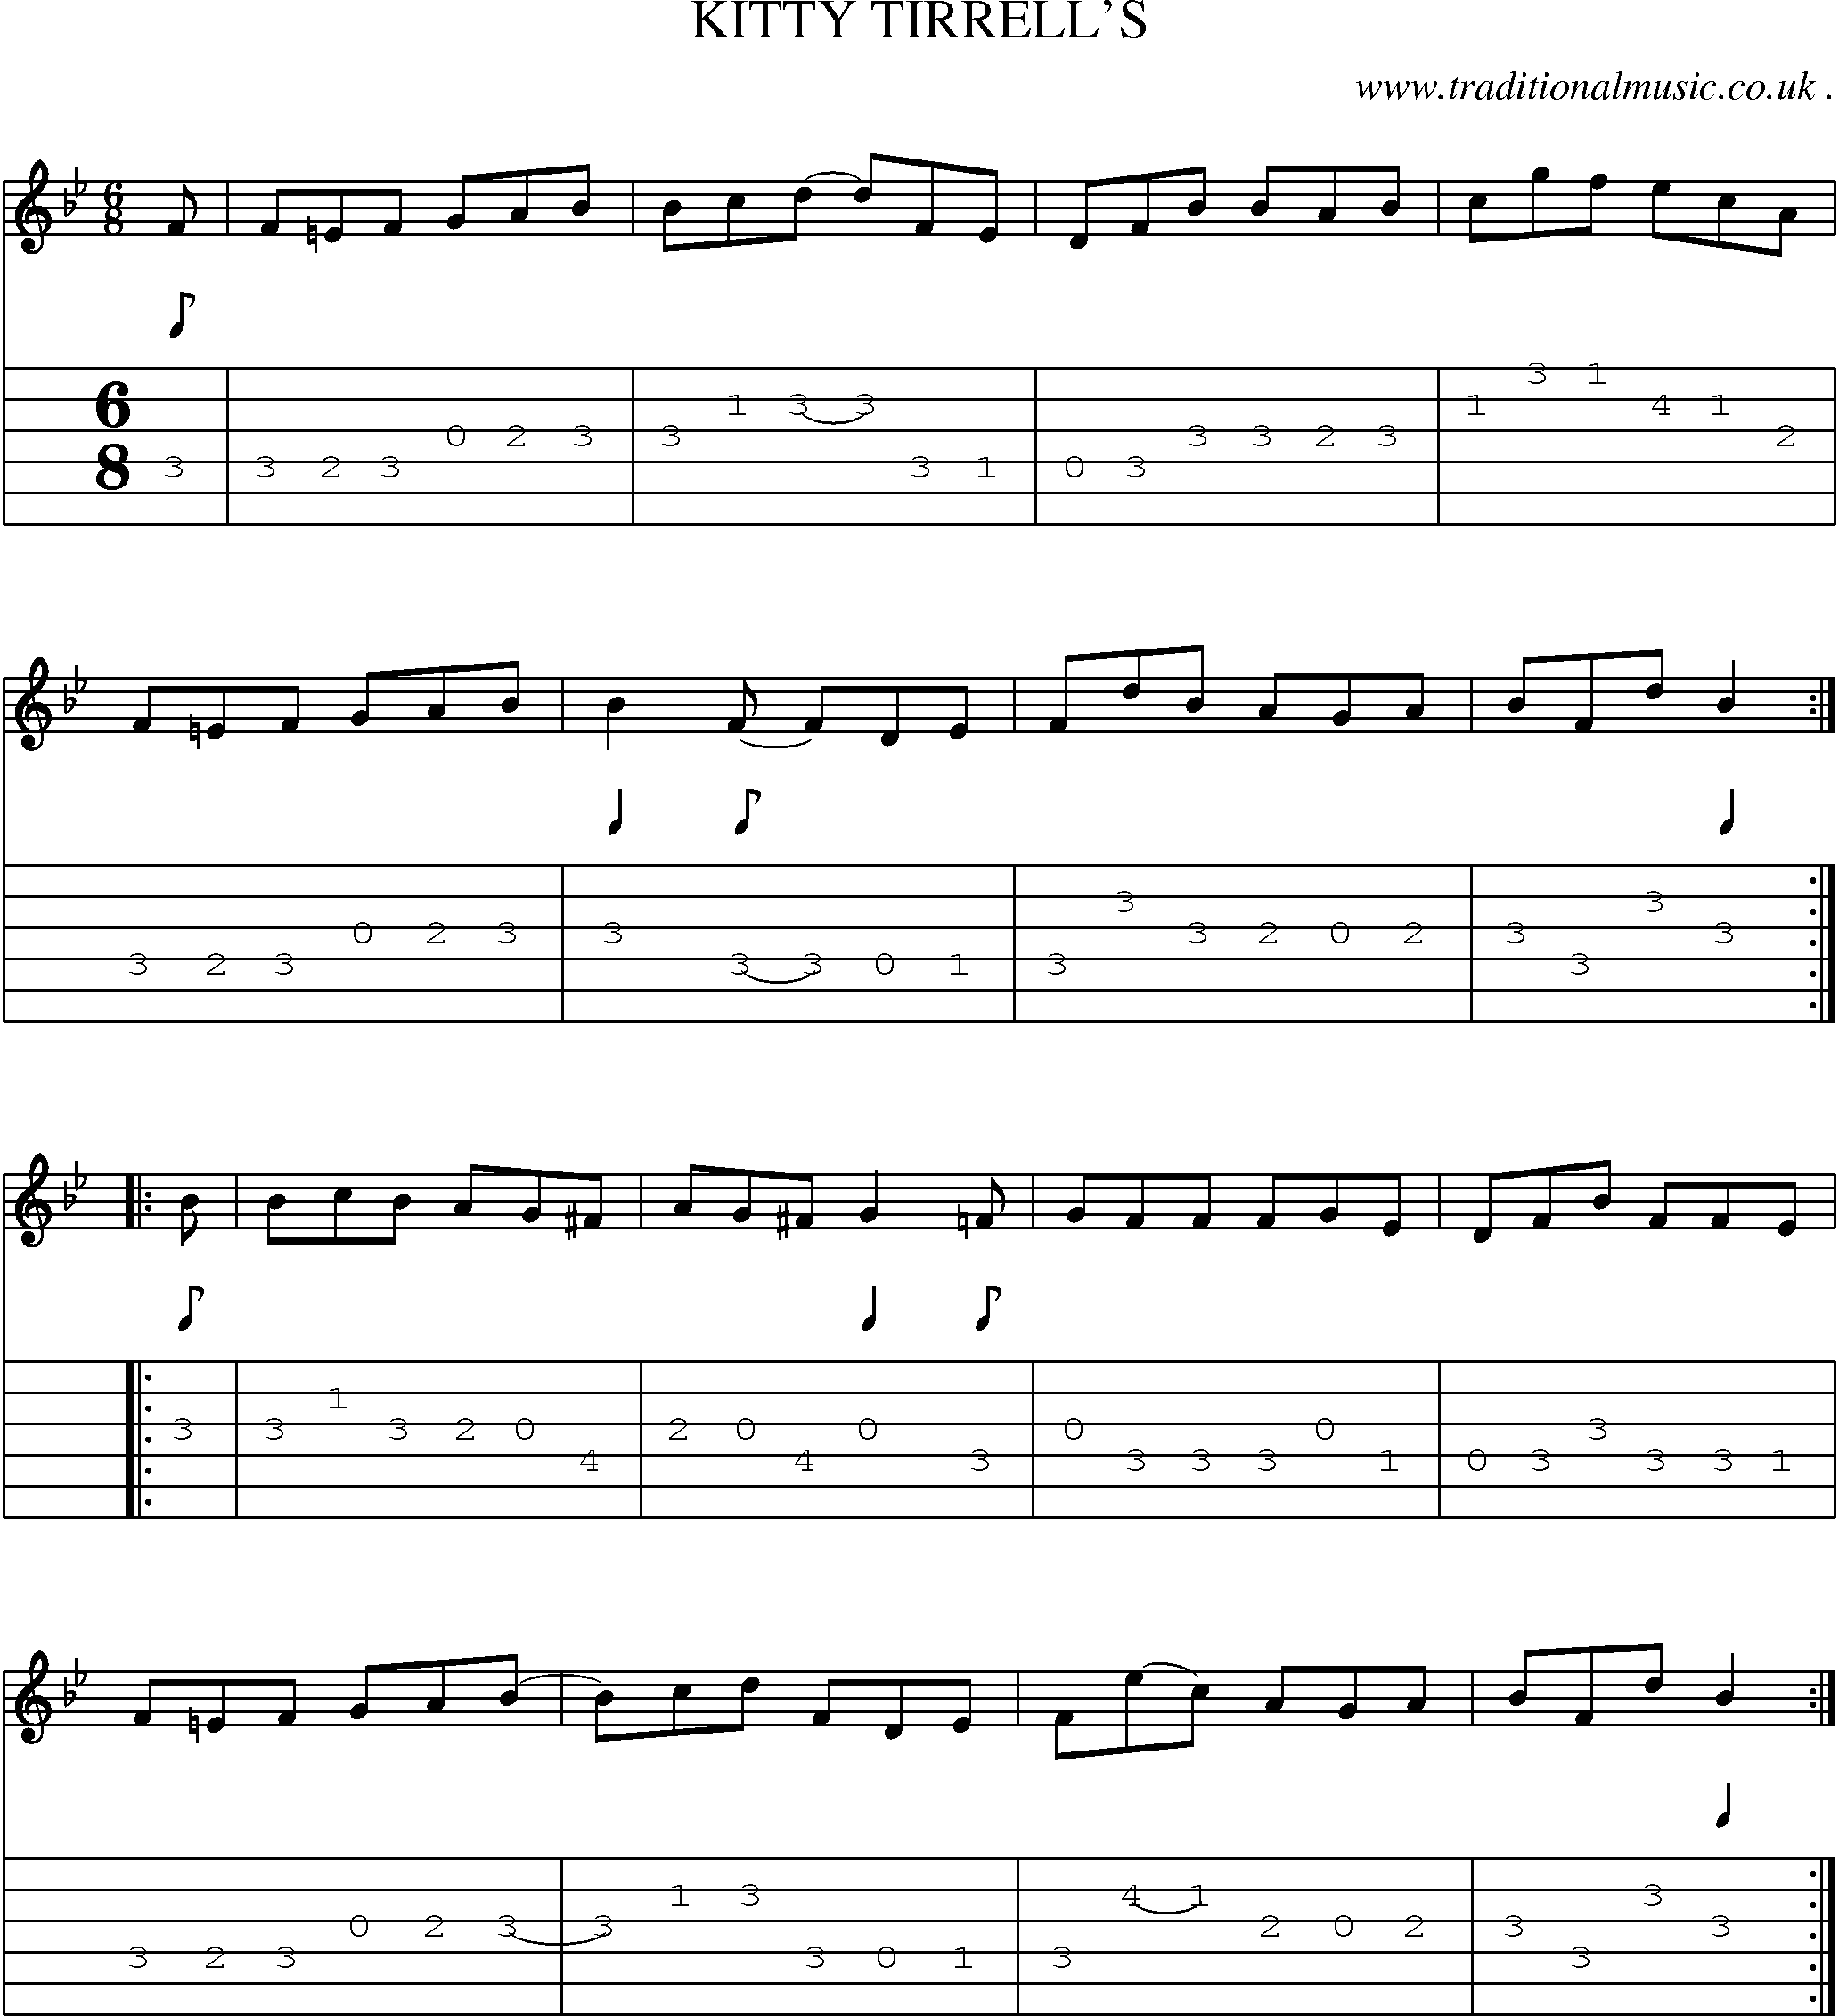 Sheet-Music and Guitar Tabs for Kitty Tirrells